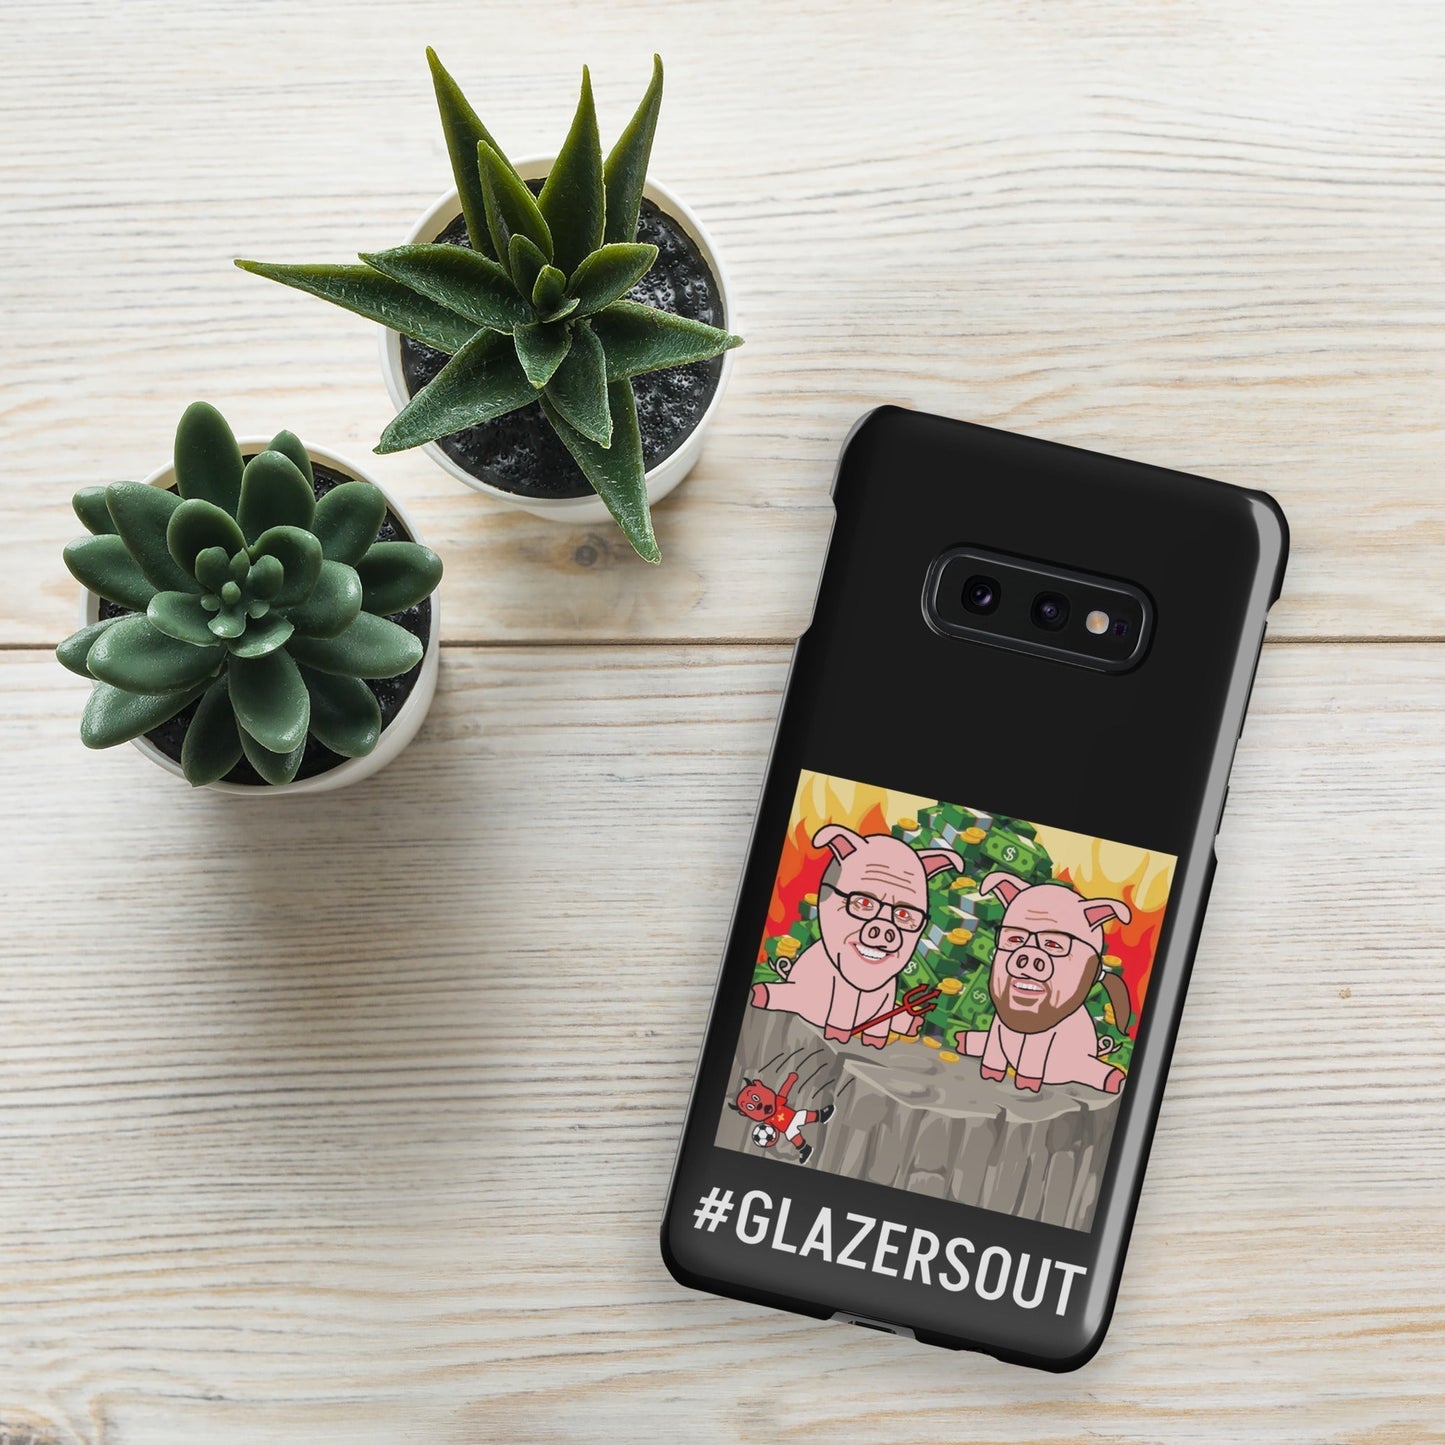 Glazers Out Manchester United Snap case for Samsung® black Next Cult Brand Football, GlazersOut, Manchester United